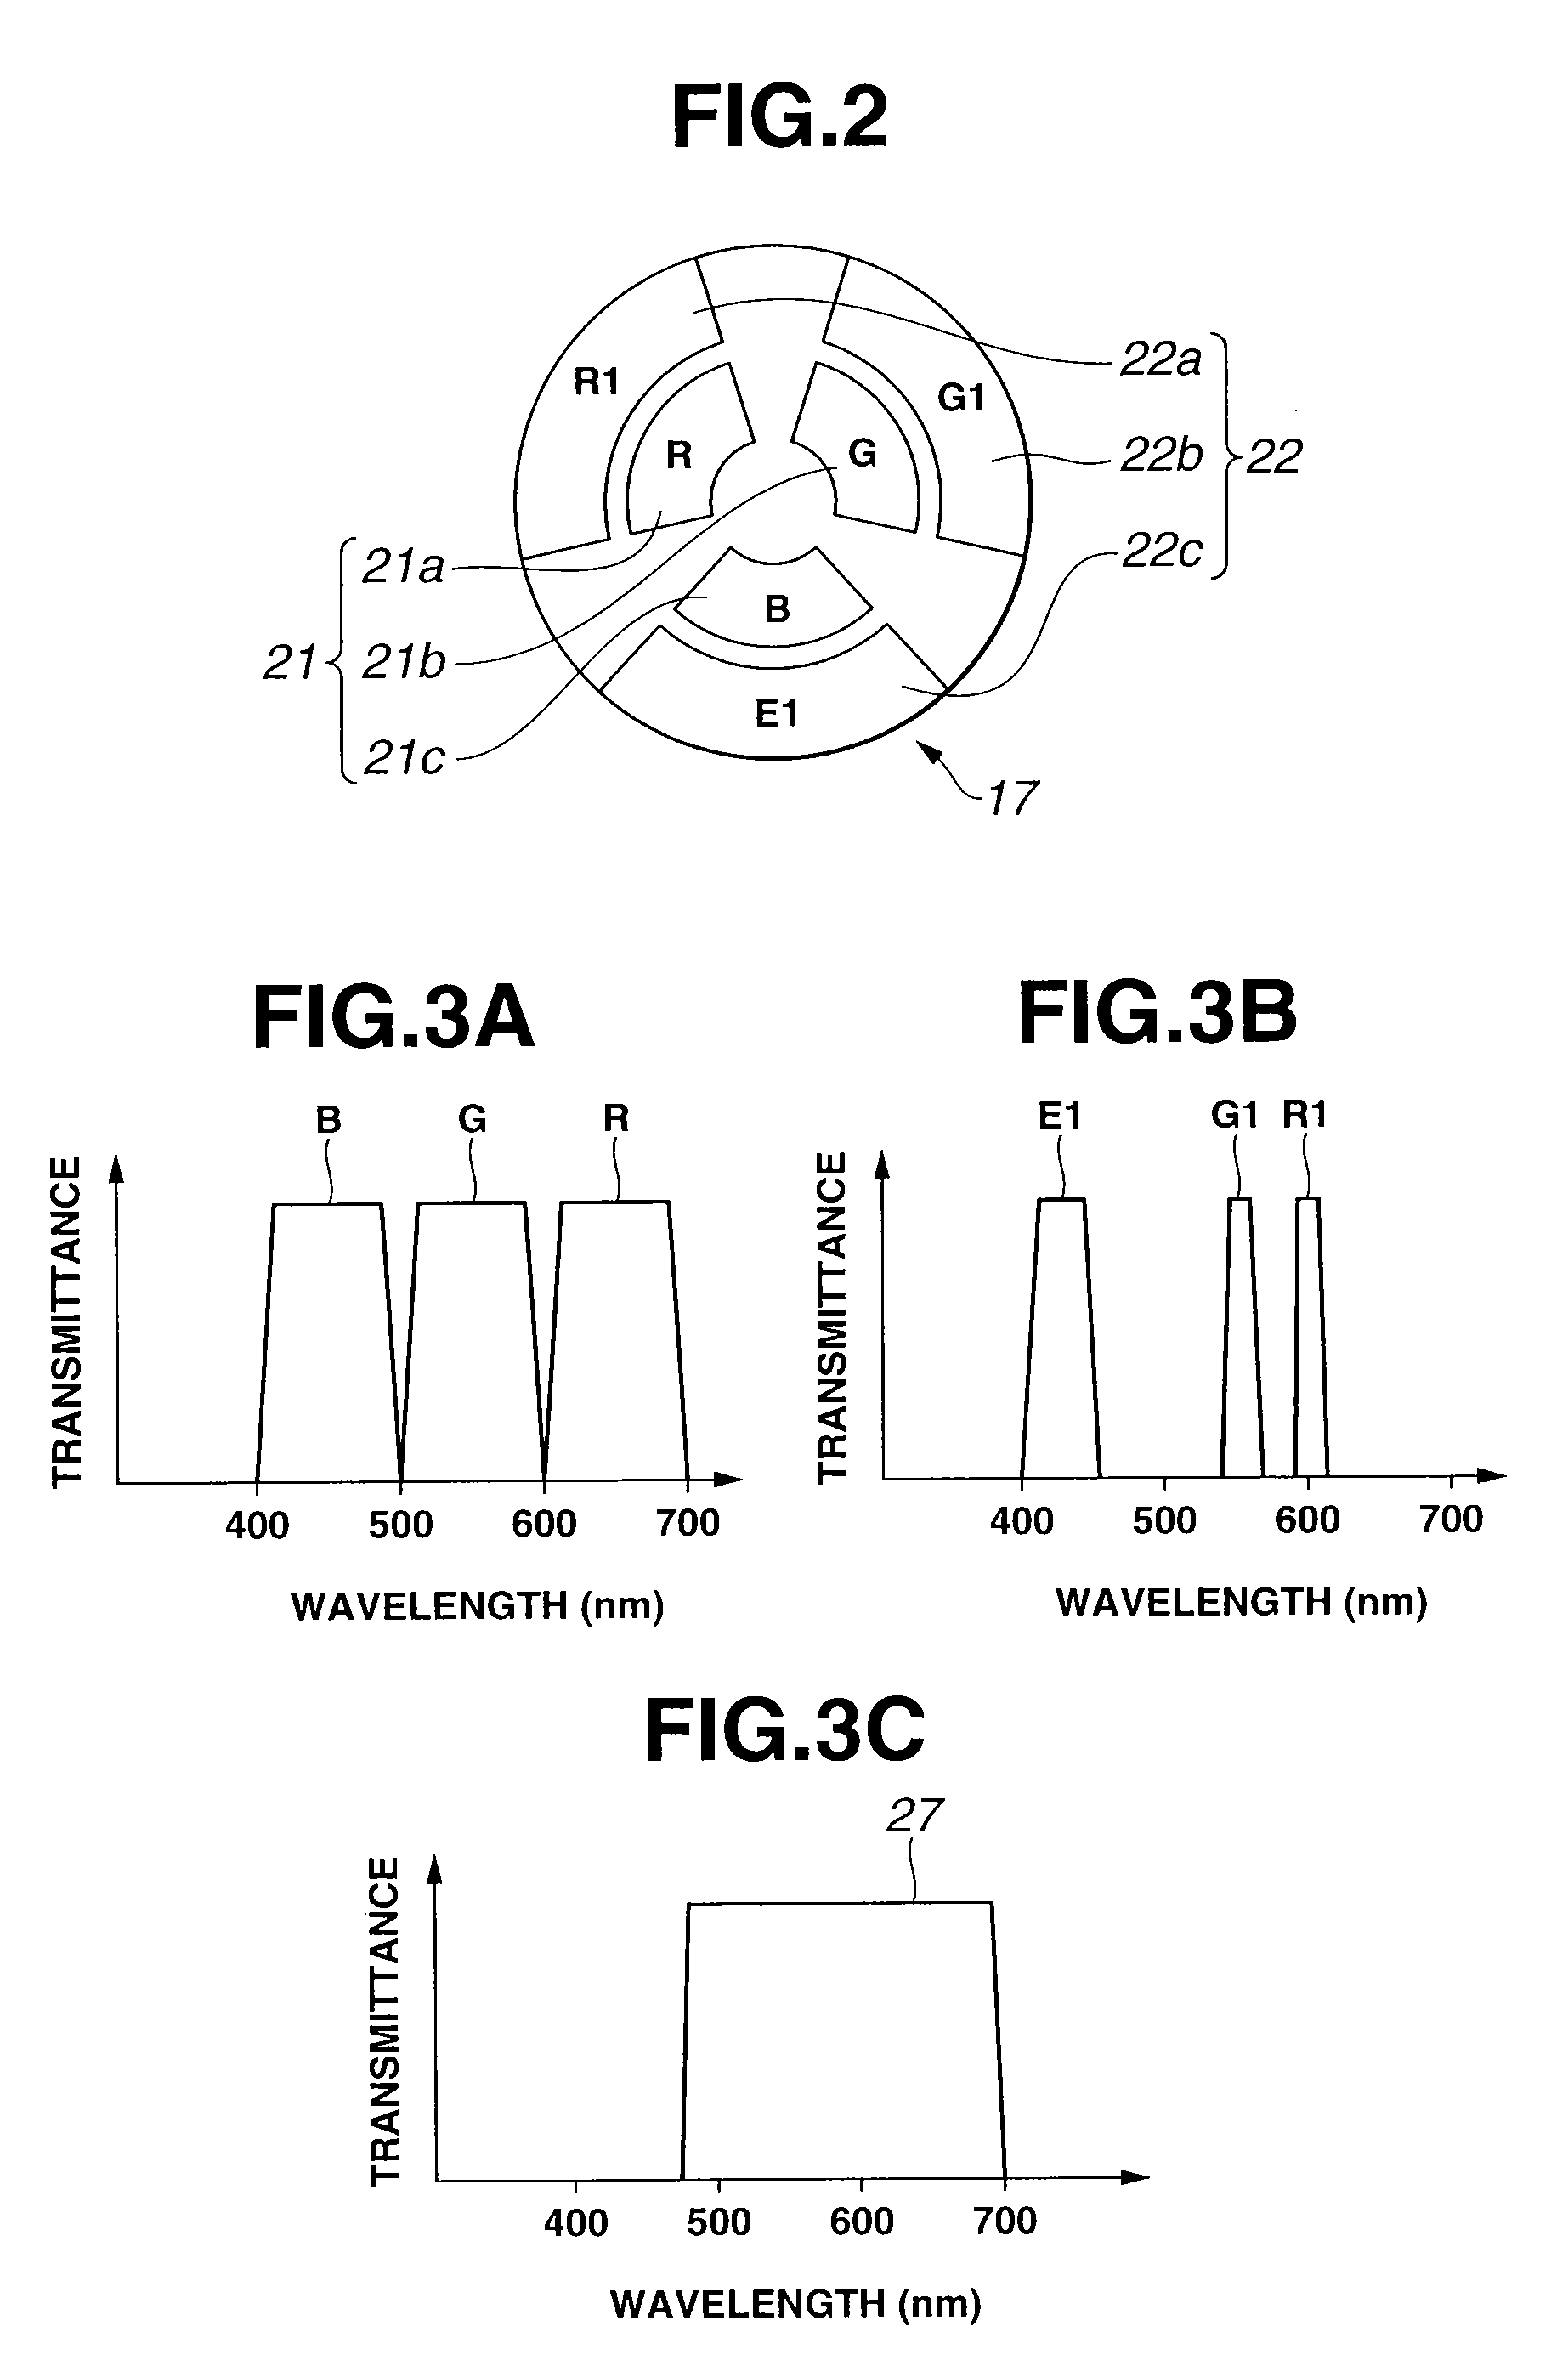 Endoscope system using normal light and fluorescence